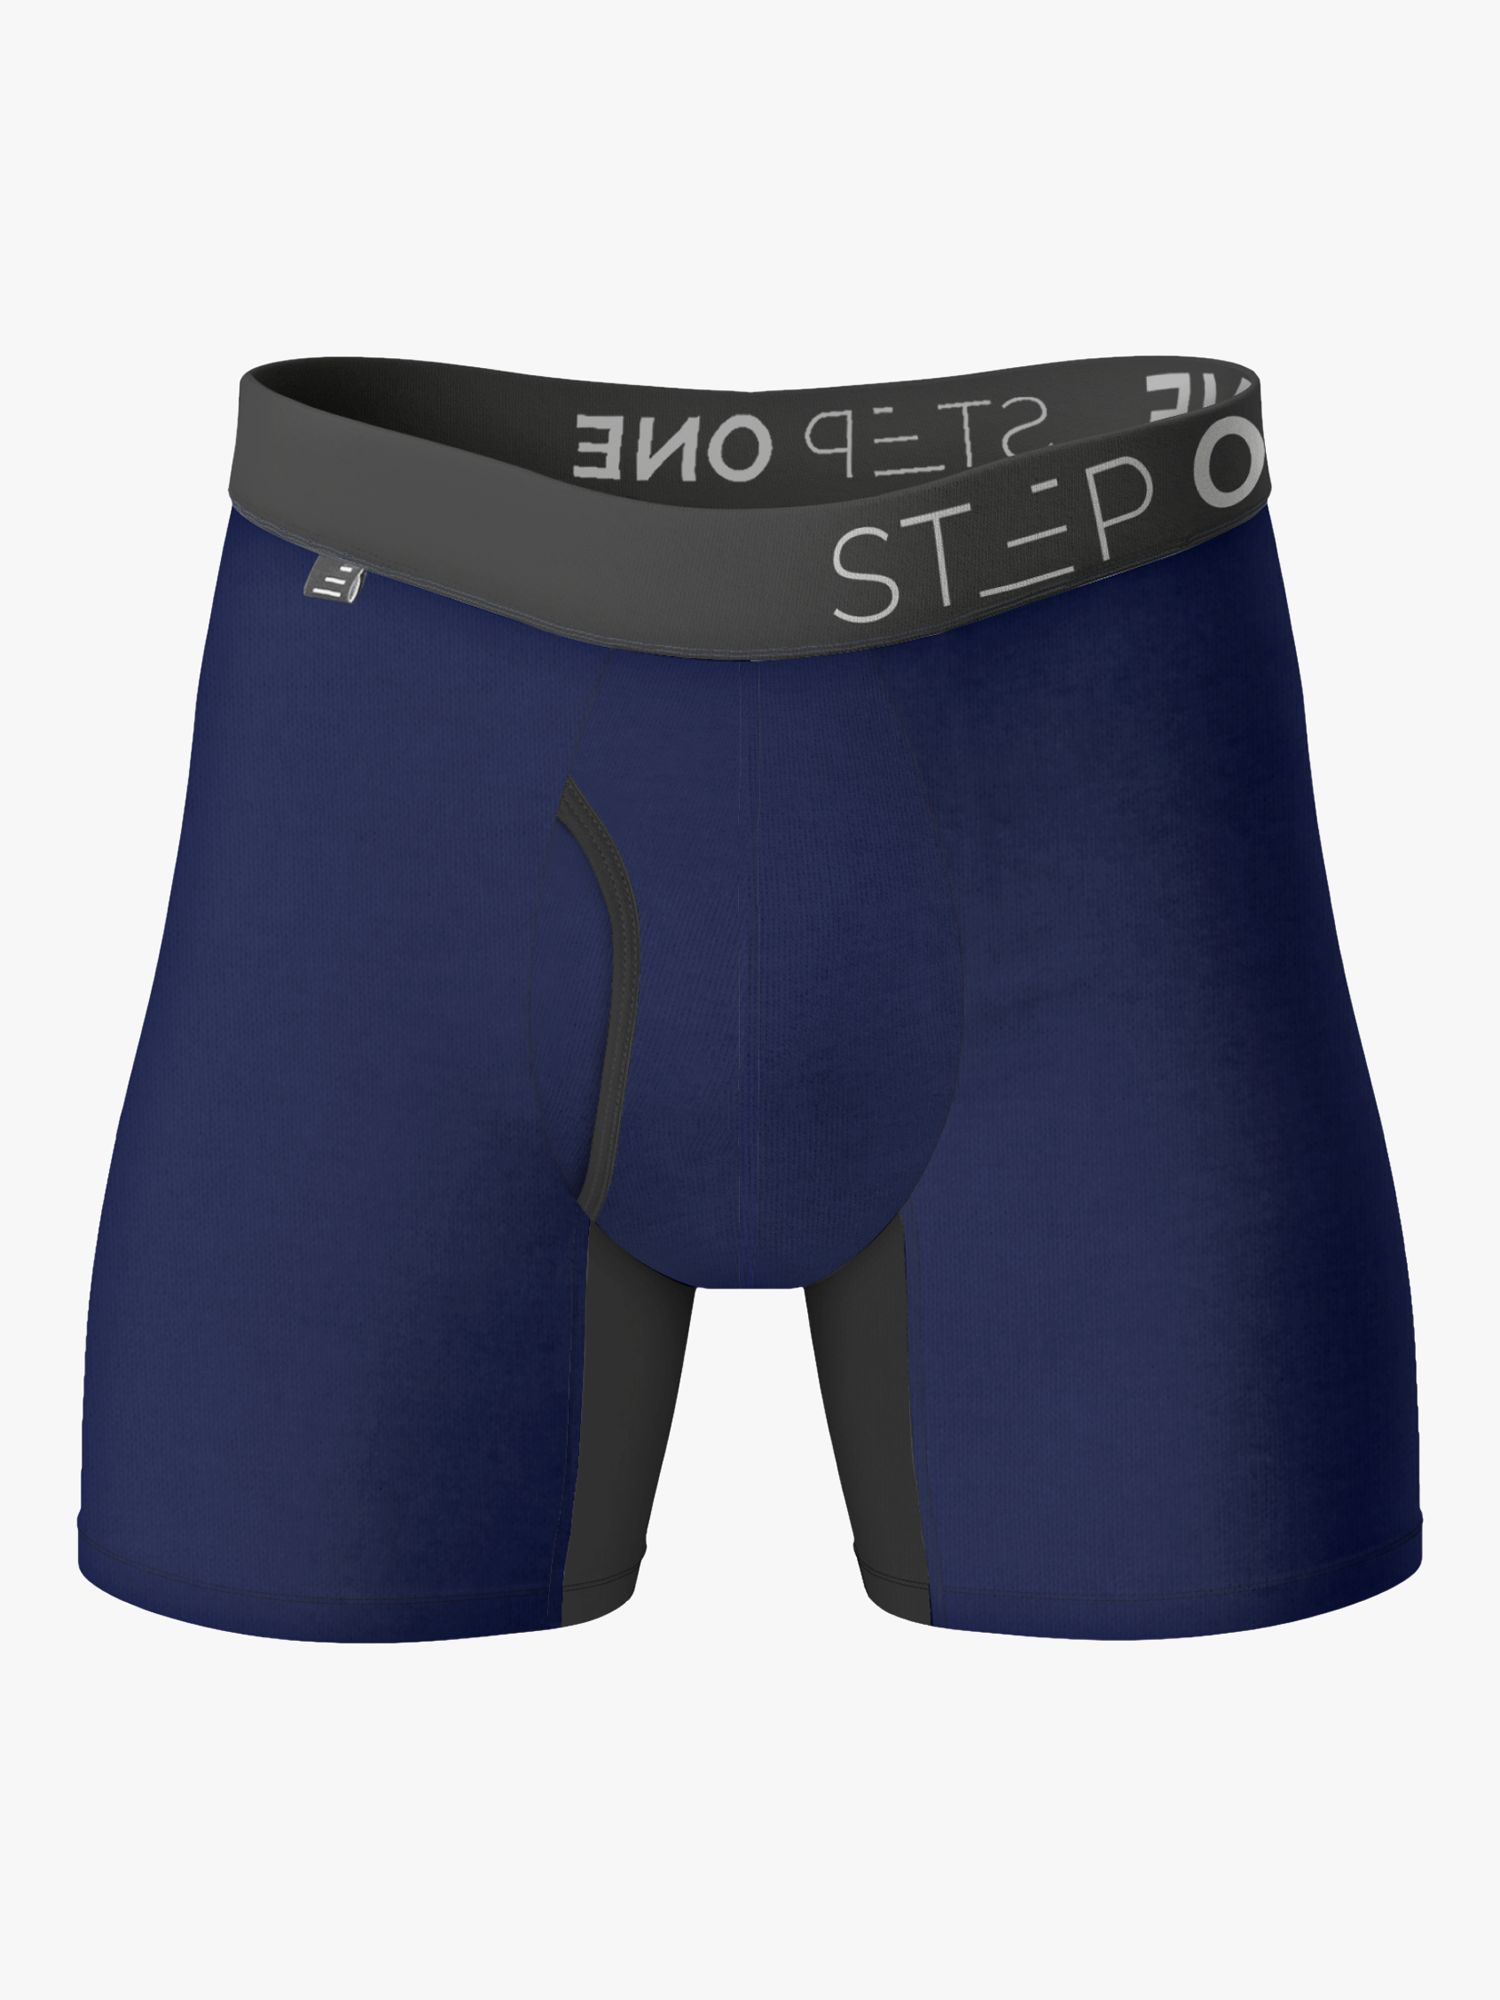 Step One Bamboo Boxer Briefs With Fly, Ahoy Sailor, XL